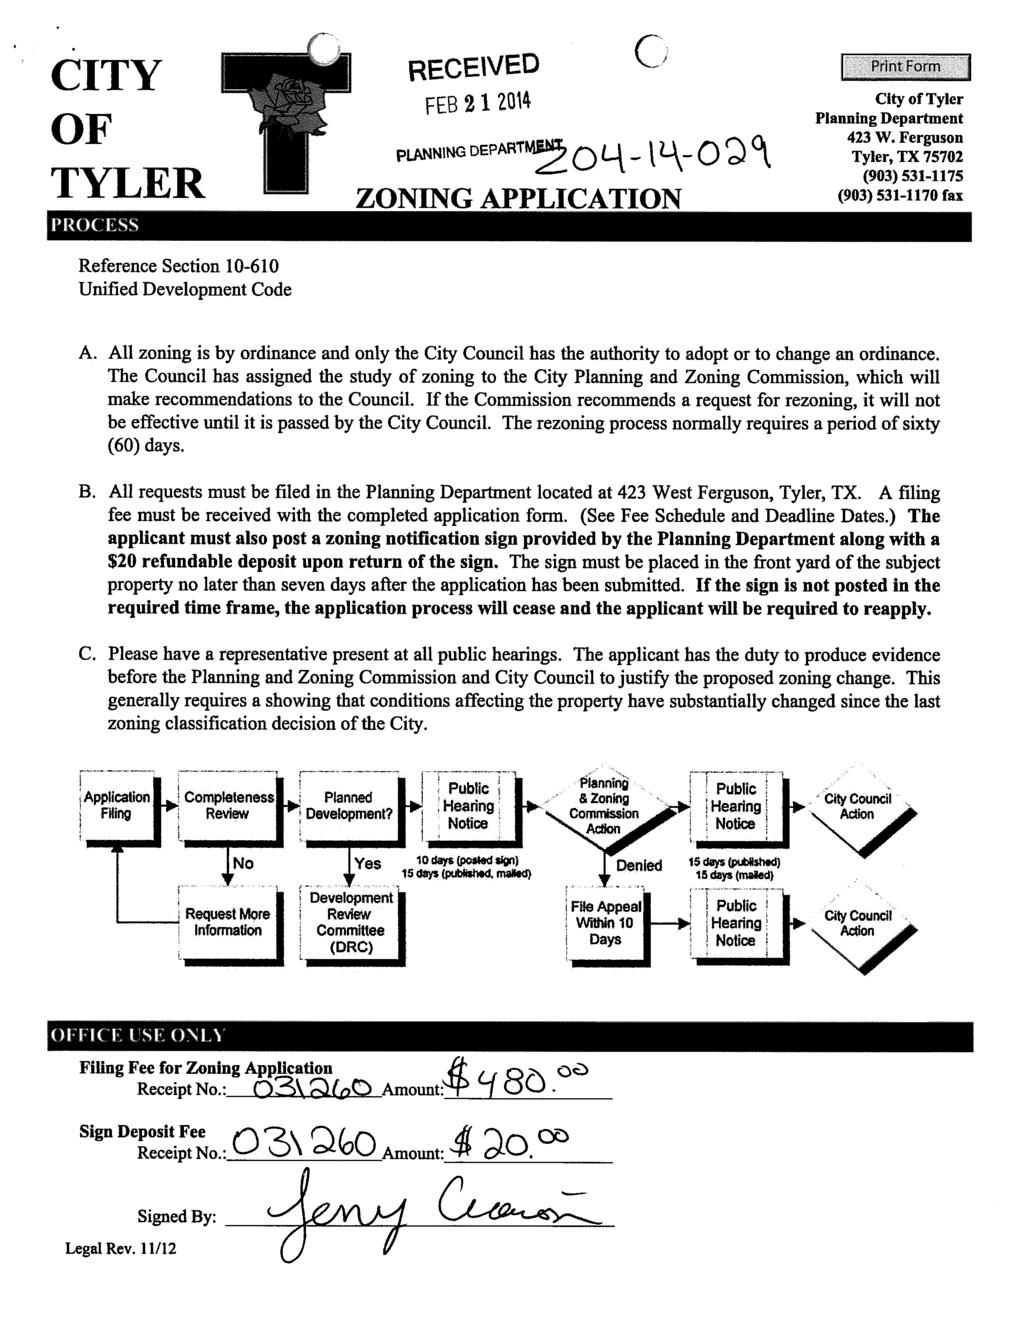 CITY OF TYLER PROCESS Reference Section 10-610 Unified Development Code RECEIVED FEB 2 1 2014 PLANNING DEPARTR2 ZONING APPLICATION Print Form - City of Tyler Planning Department 423 W.